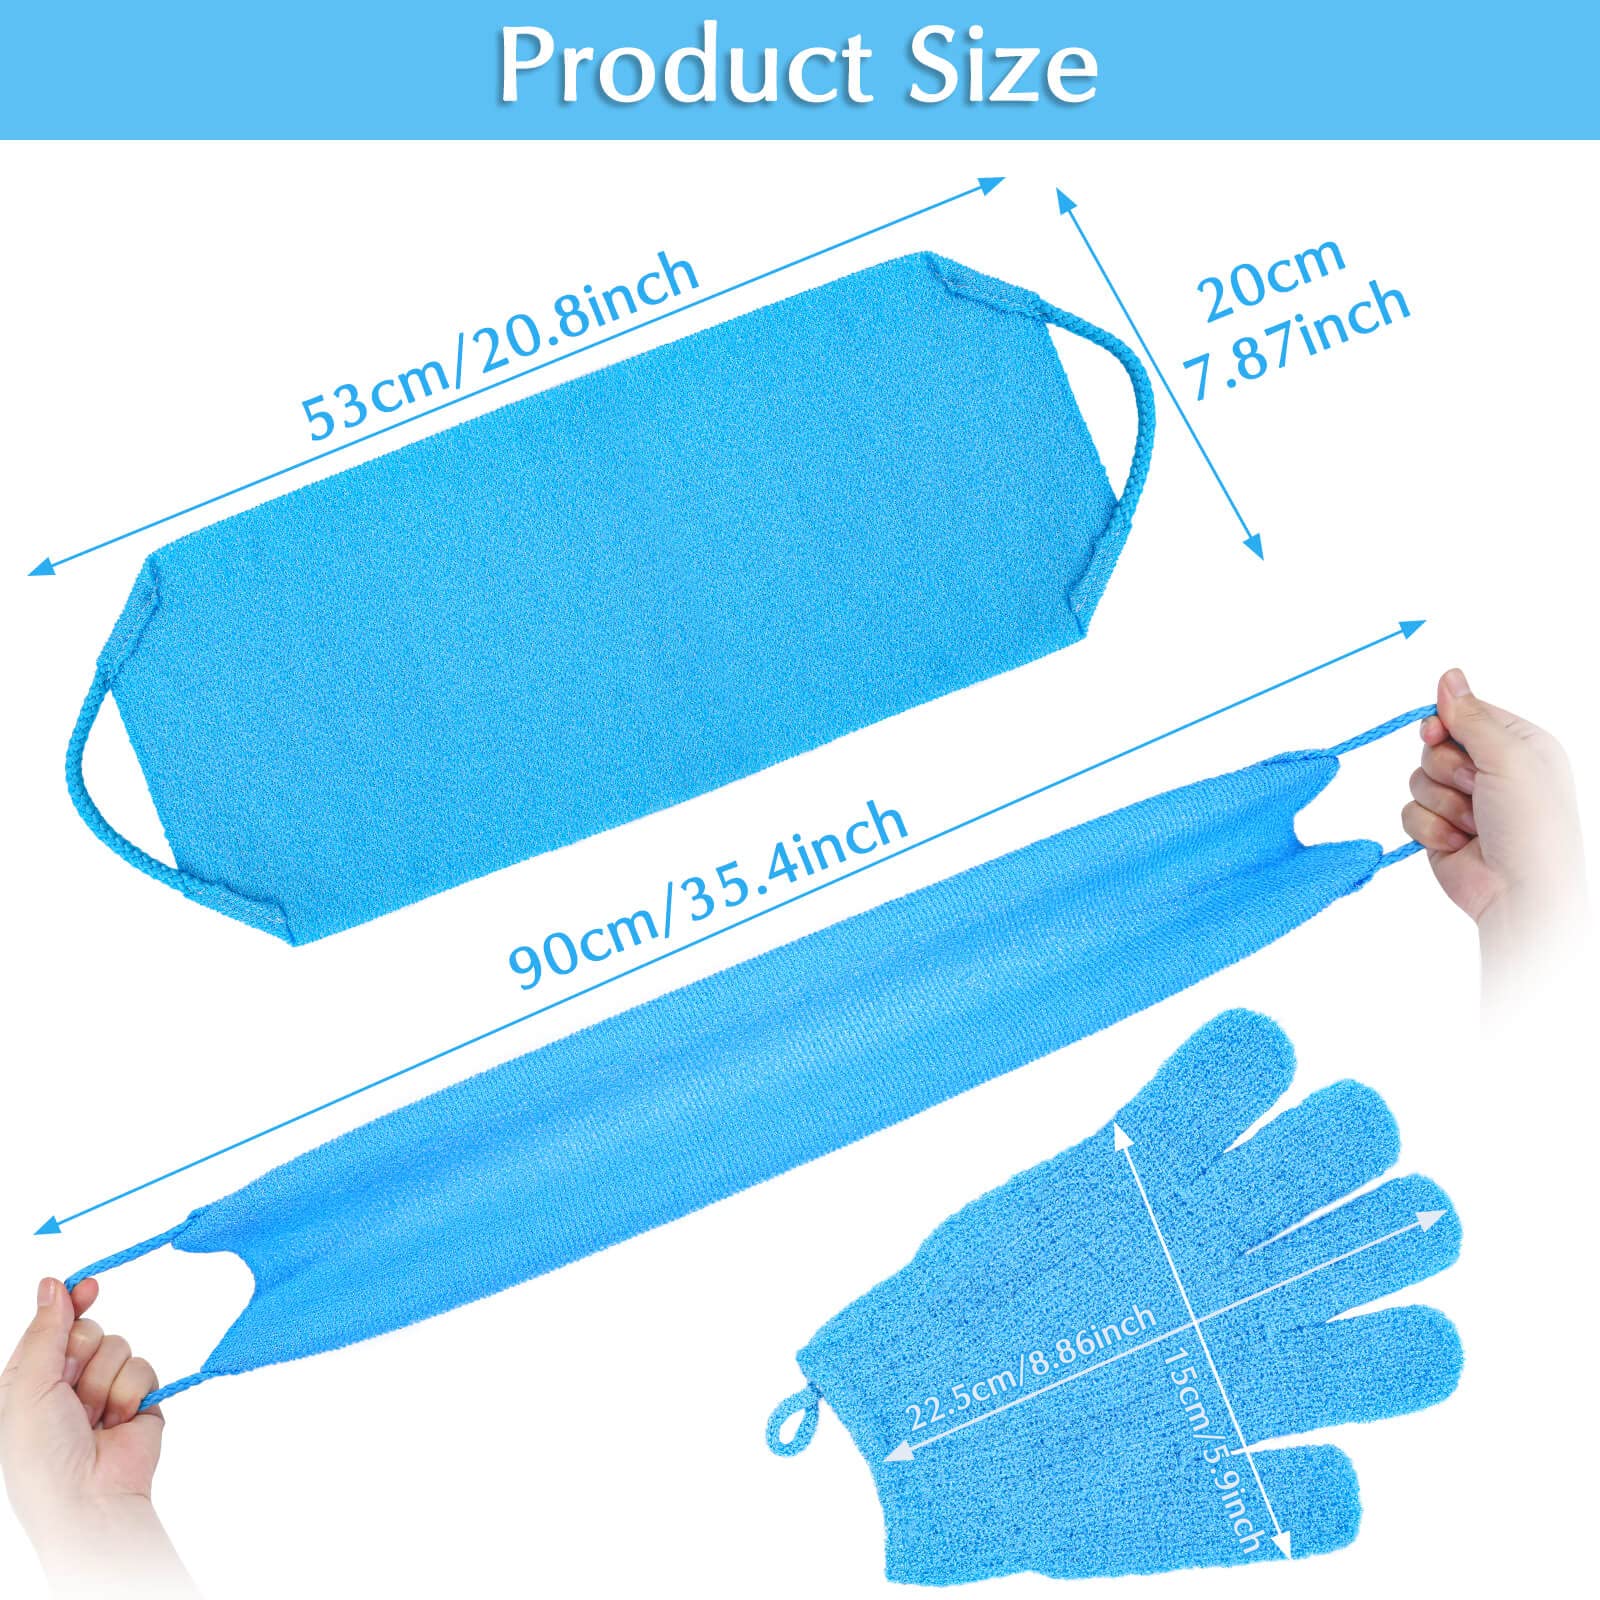 Anezus Exfoliating Back Scrubber Bath Gloves Set, Exfoliating Shower Towel with Shower Gloves for Body Scrub, Back Cleaner Wash Gloves to Remove Dead Skin (Blue)